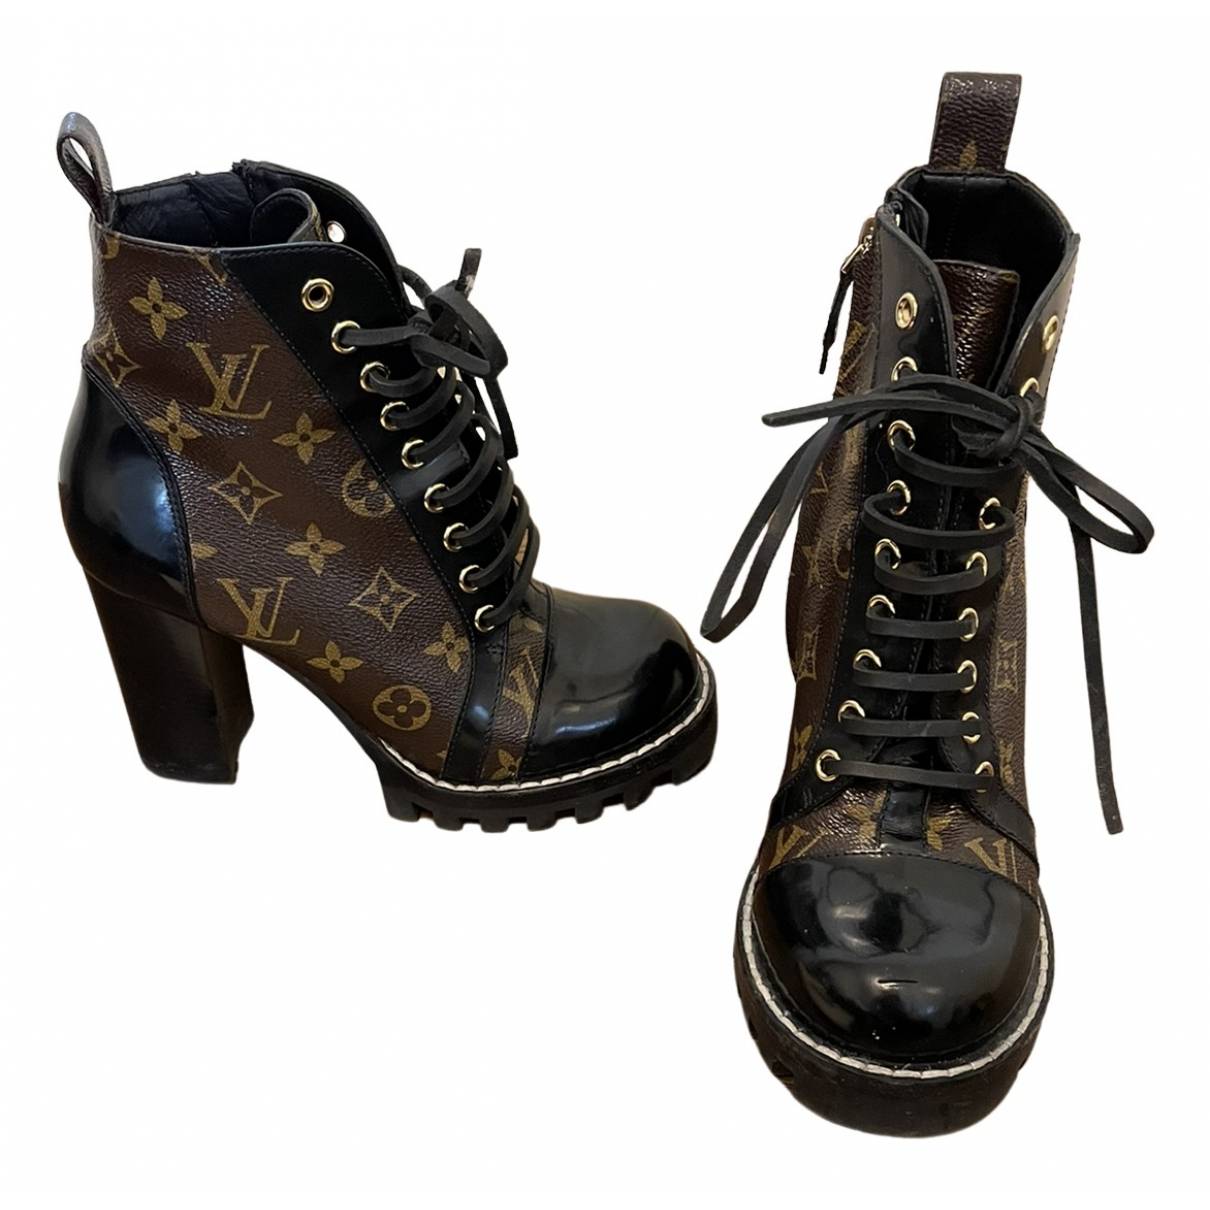 STAR TRAIL ANKLE BOOTS - Louis Vuitton